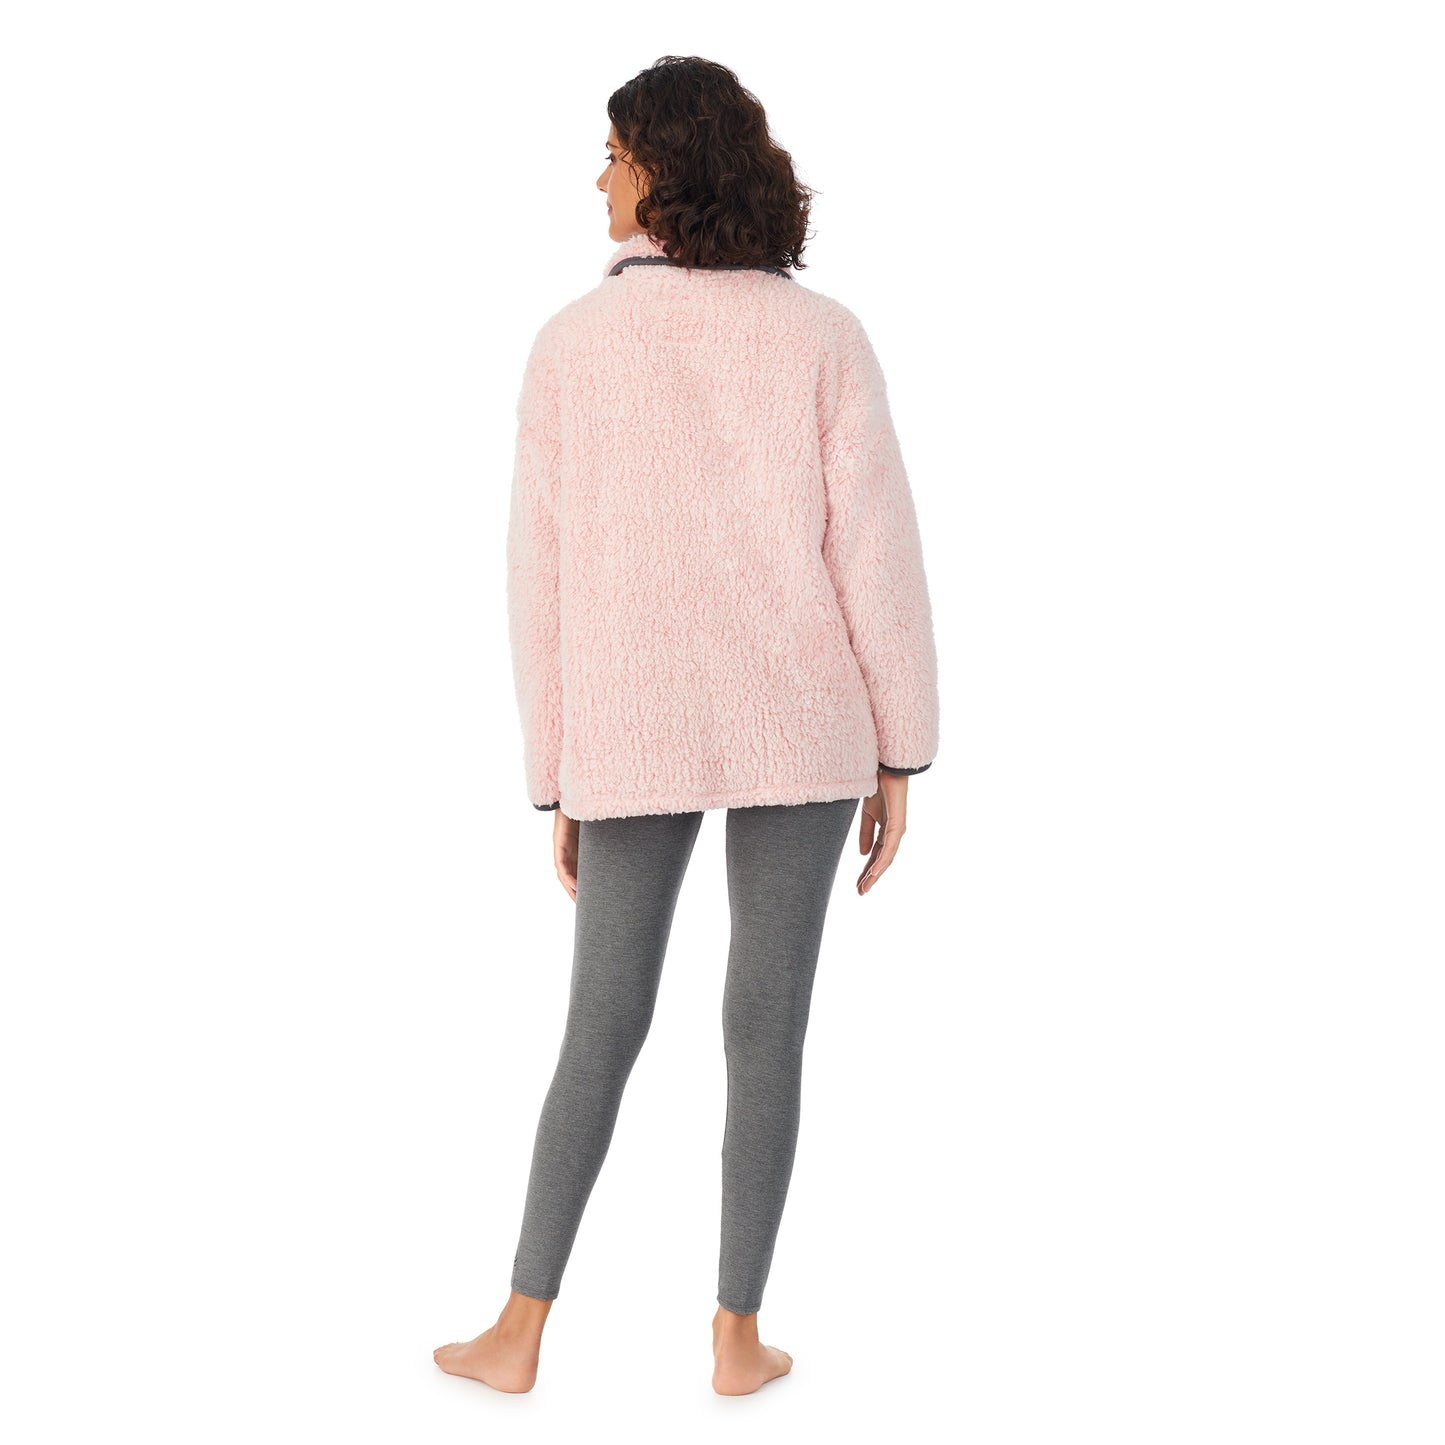 Frosted Blush; Model is wearing size S. She is 5’9”, Bust 32”, Waist 24”, Hips 34.5”.@A lady wearing pink sherpa cardi